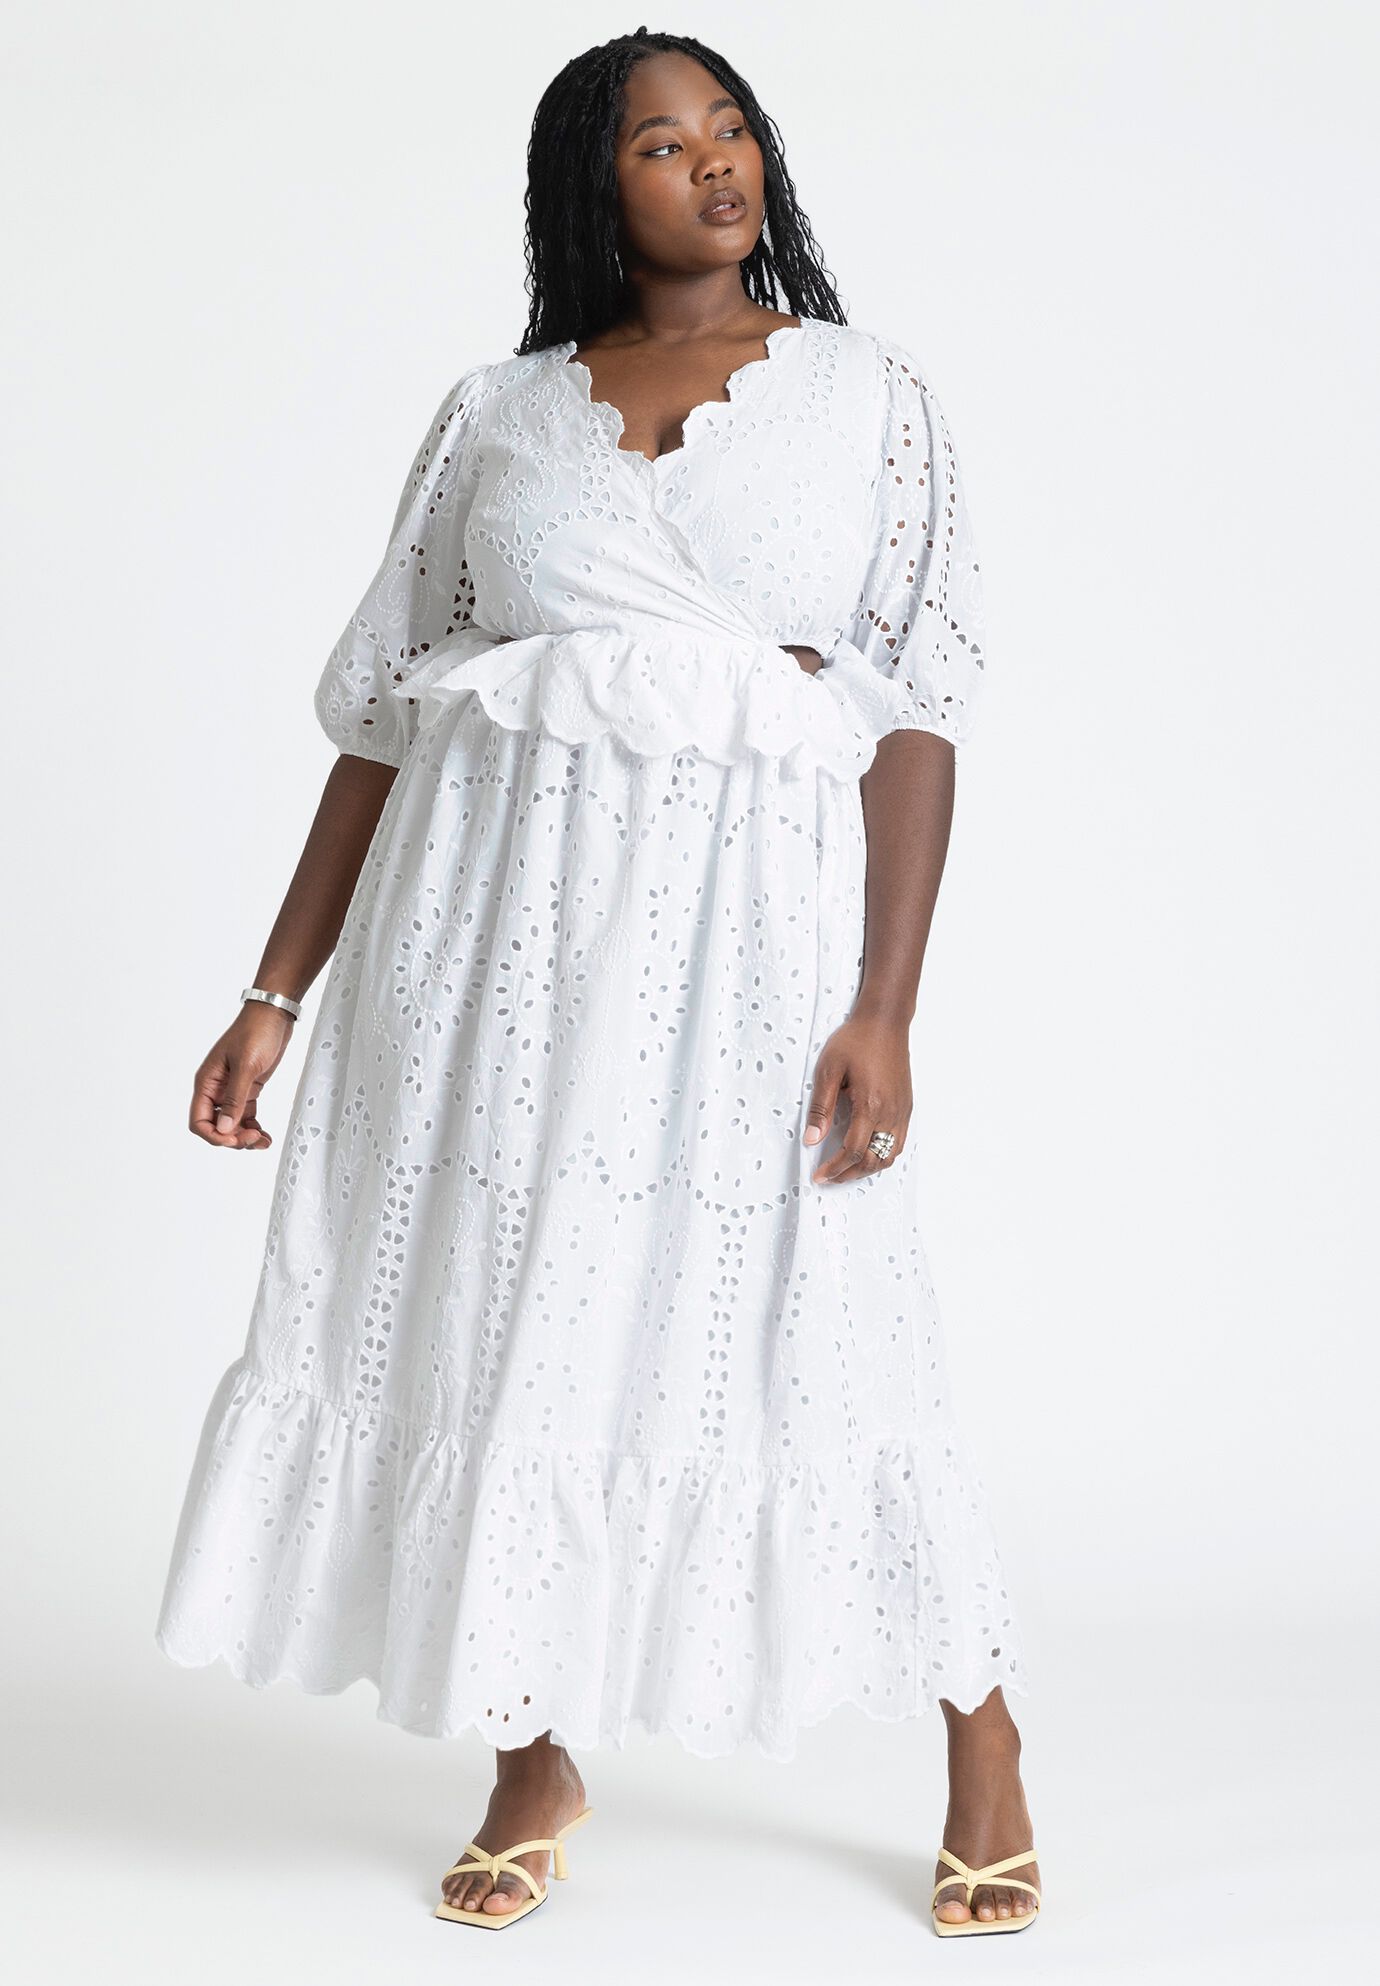 Cotton Dress With Pearls by Eloquii